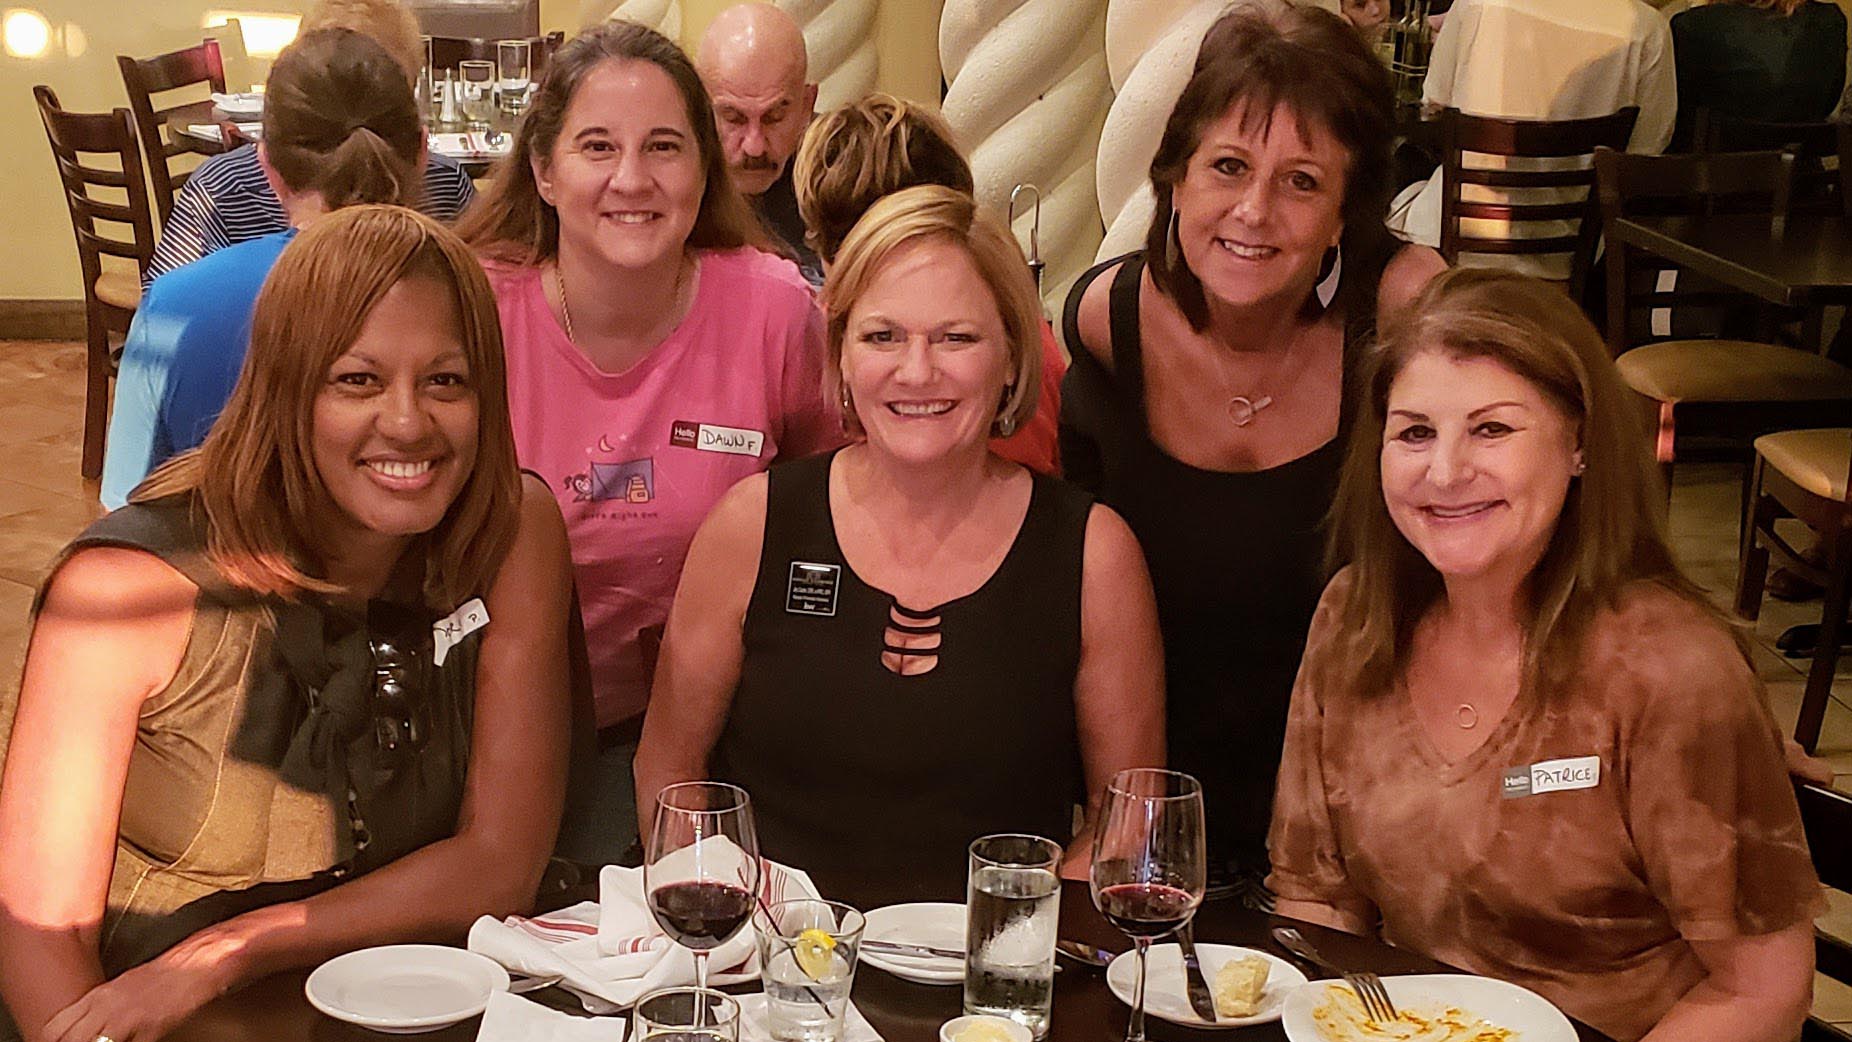 18 Years Strong, Commissioner Joy Carter Continues 'Girls Night Out' Tradition